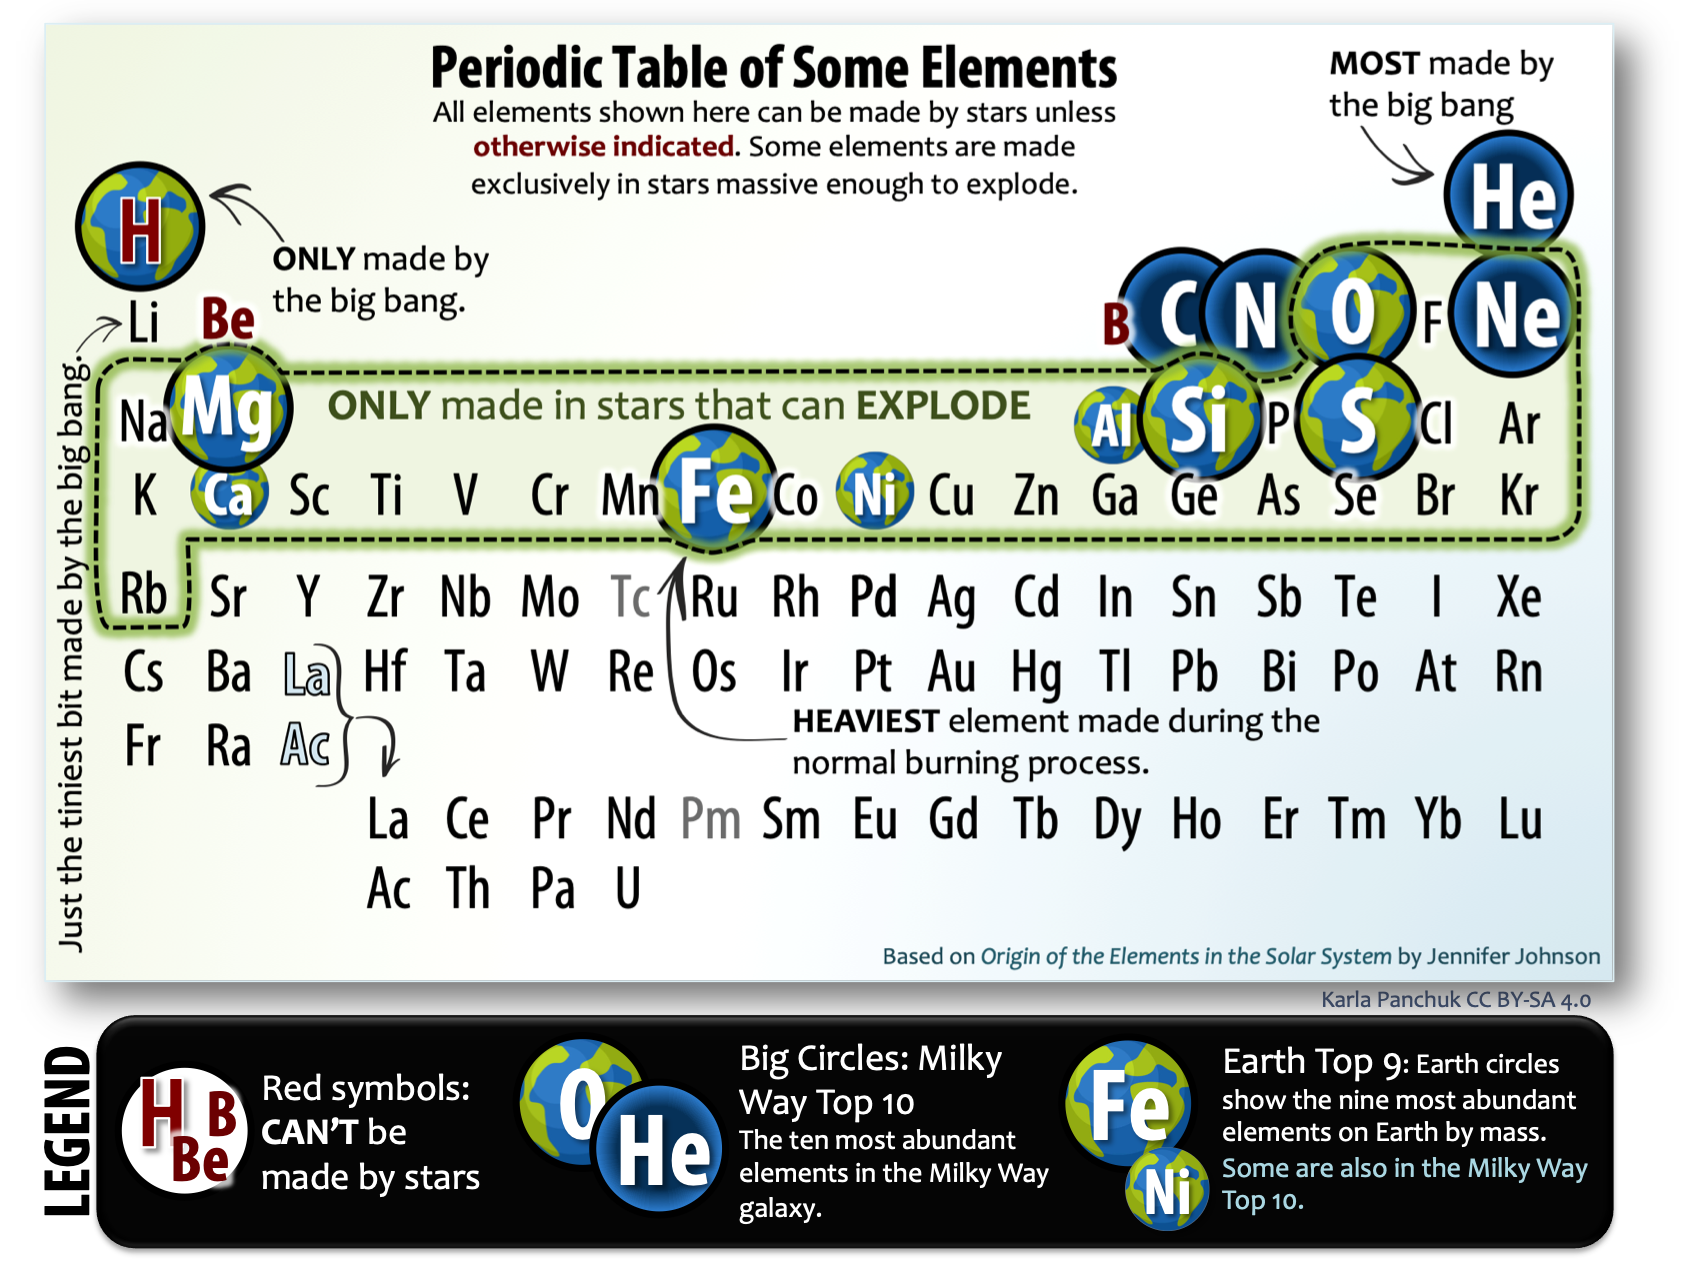 Simplified periodic table of the elements.